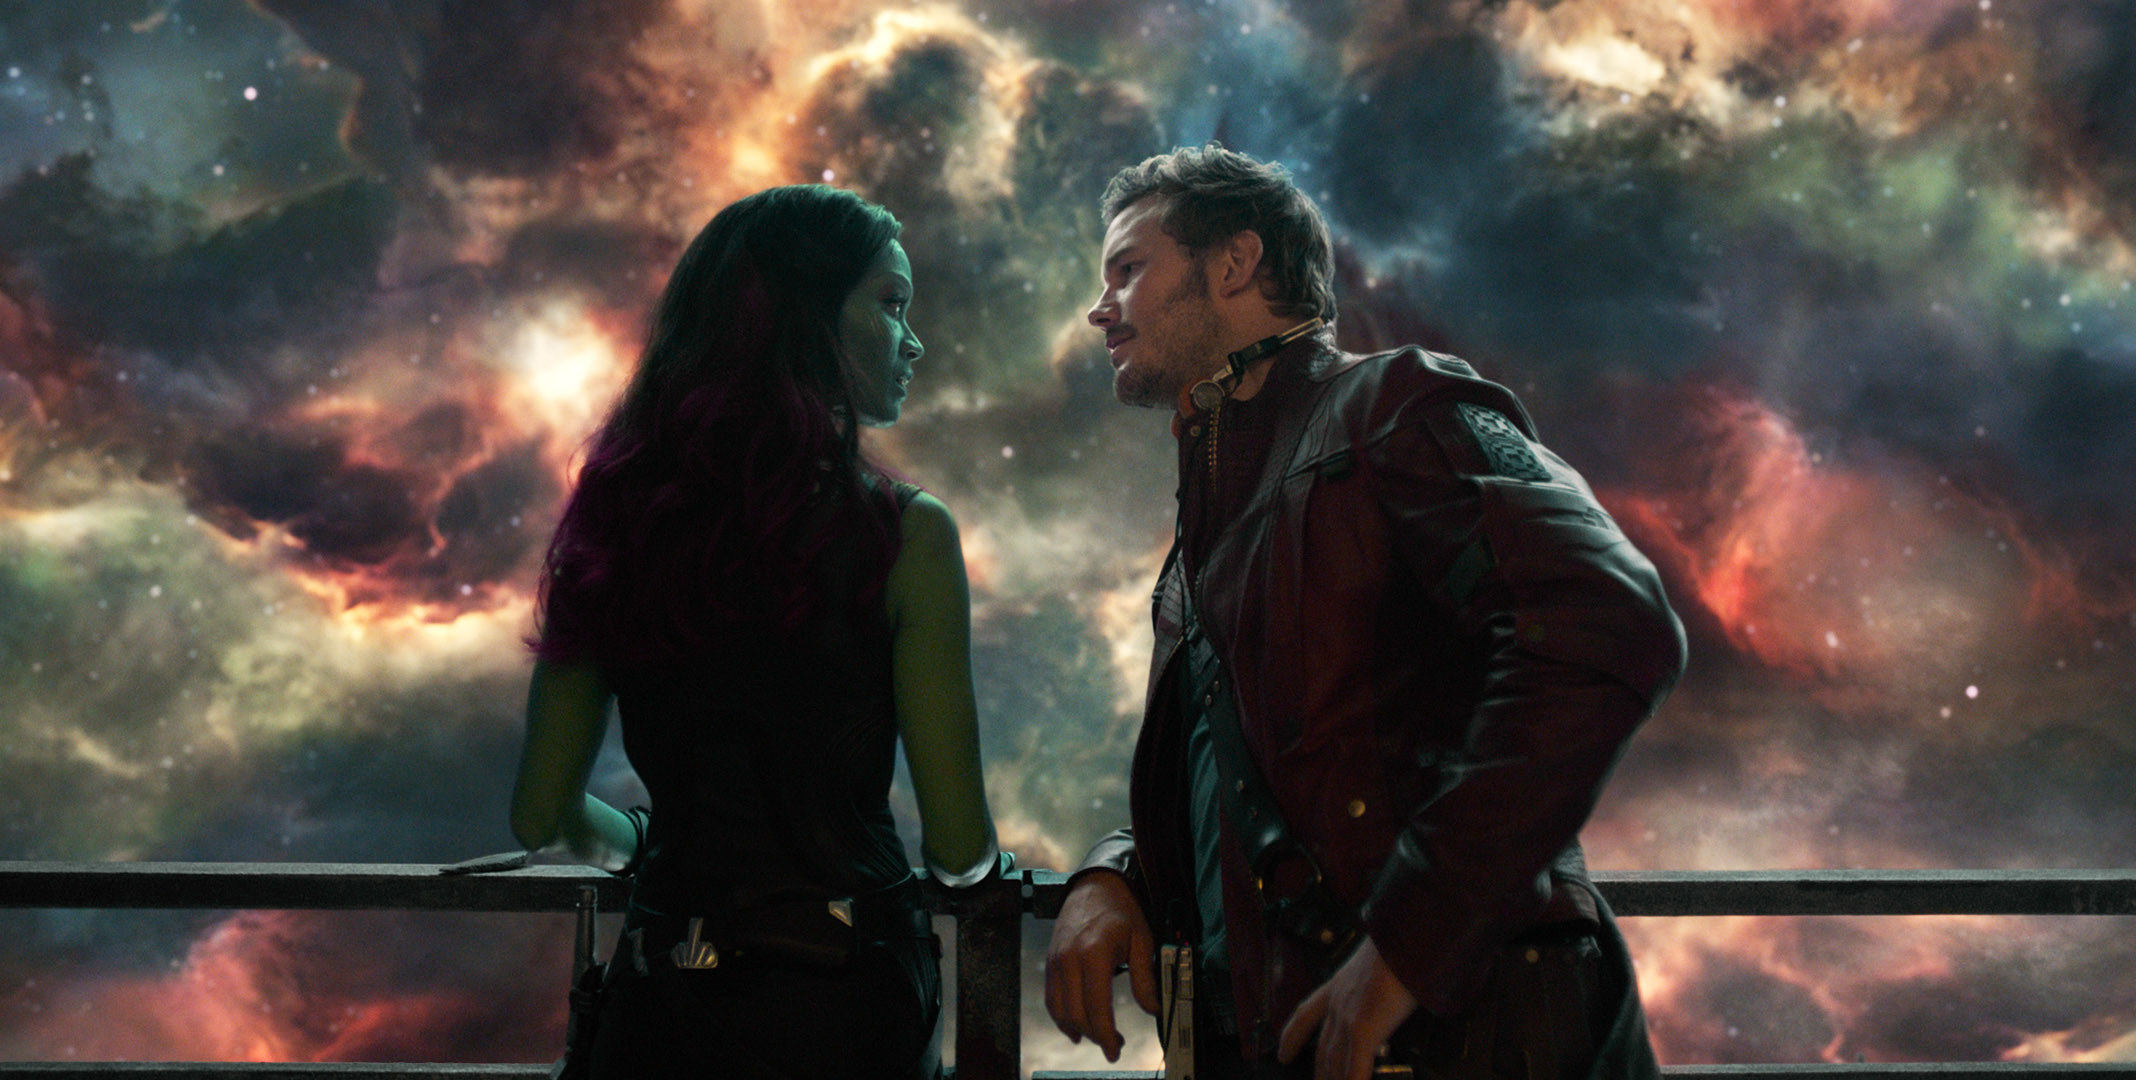 leaning against a railing, Gamora and Peter chat quietly